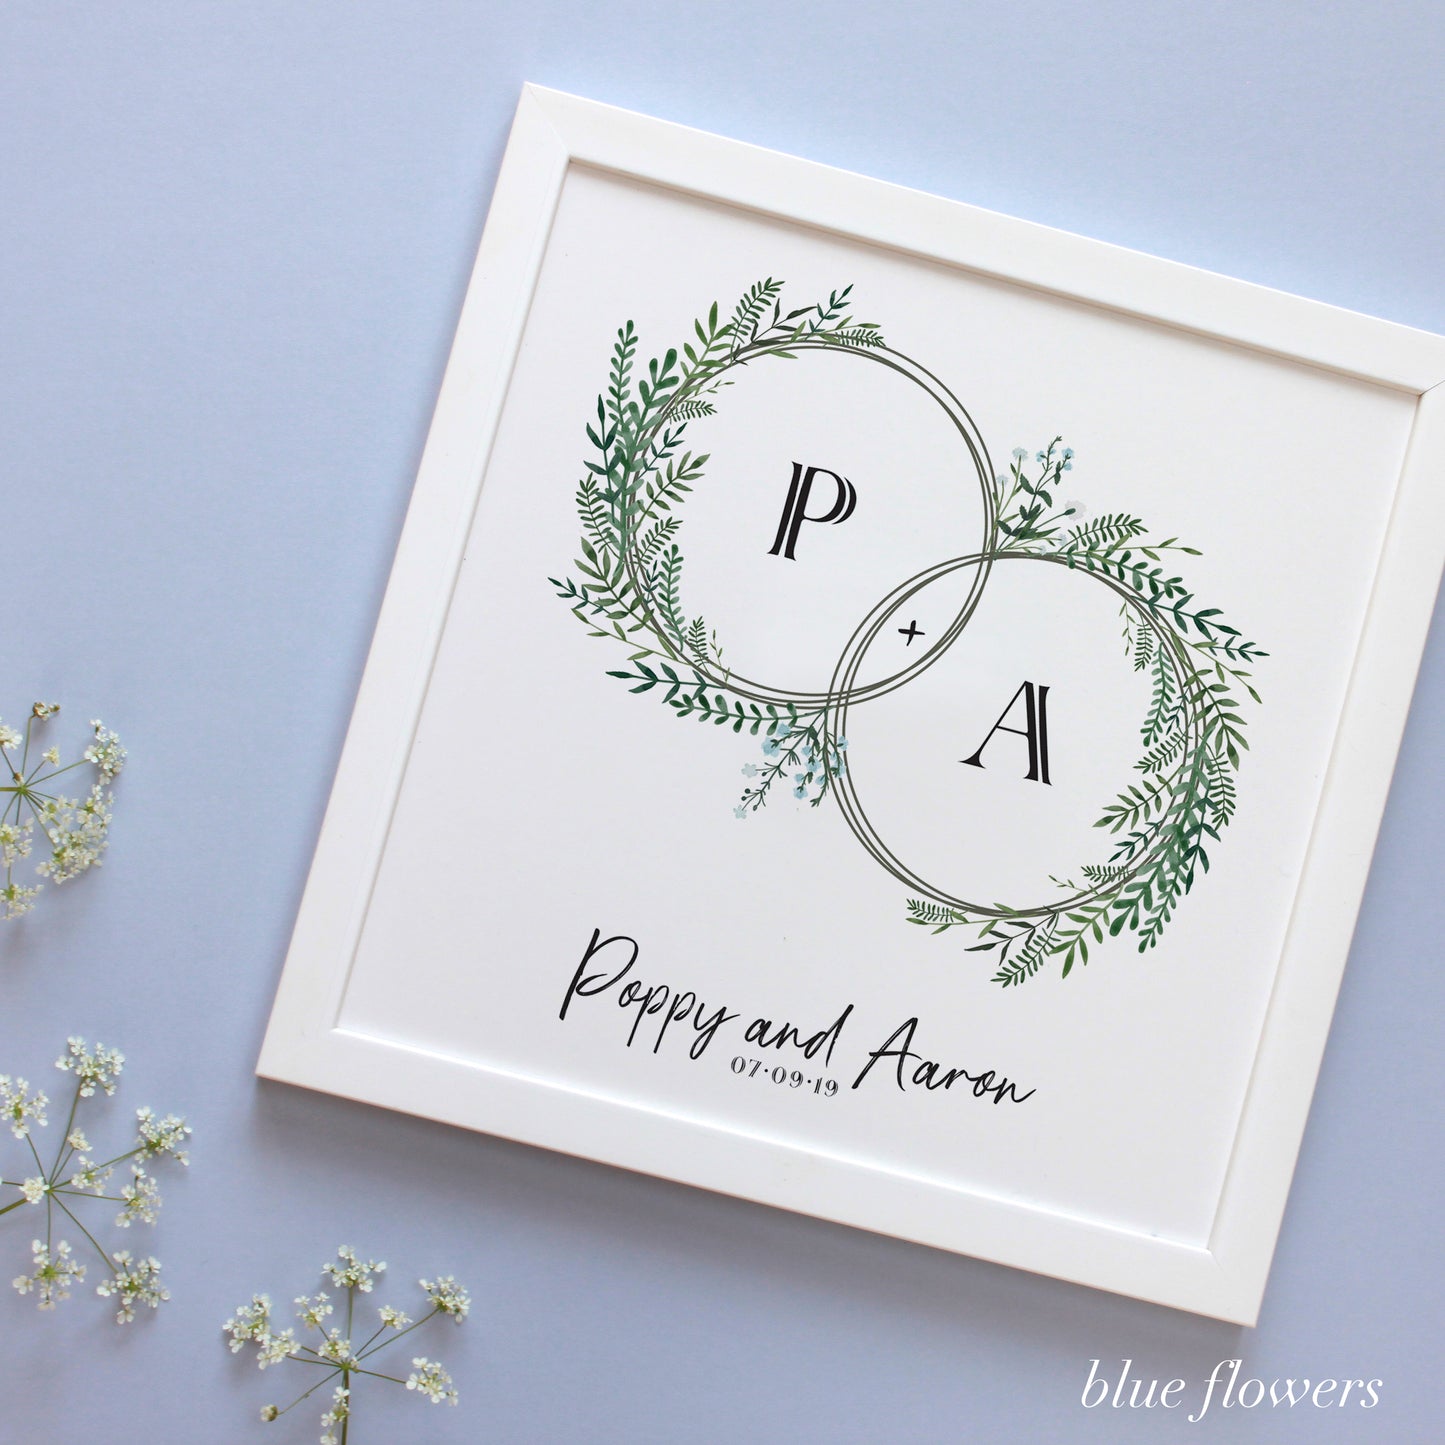 personalised wedding gift idea for bride and groom